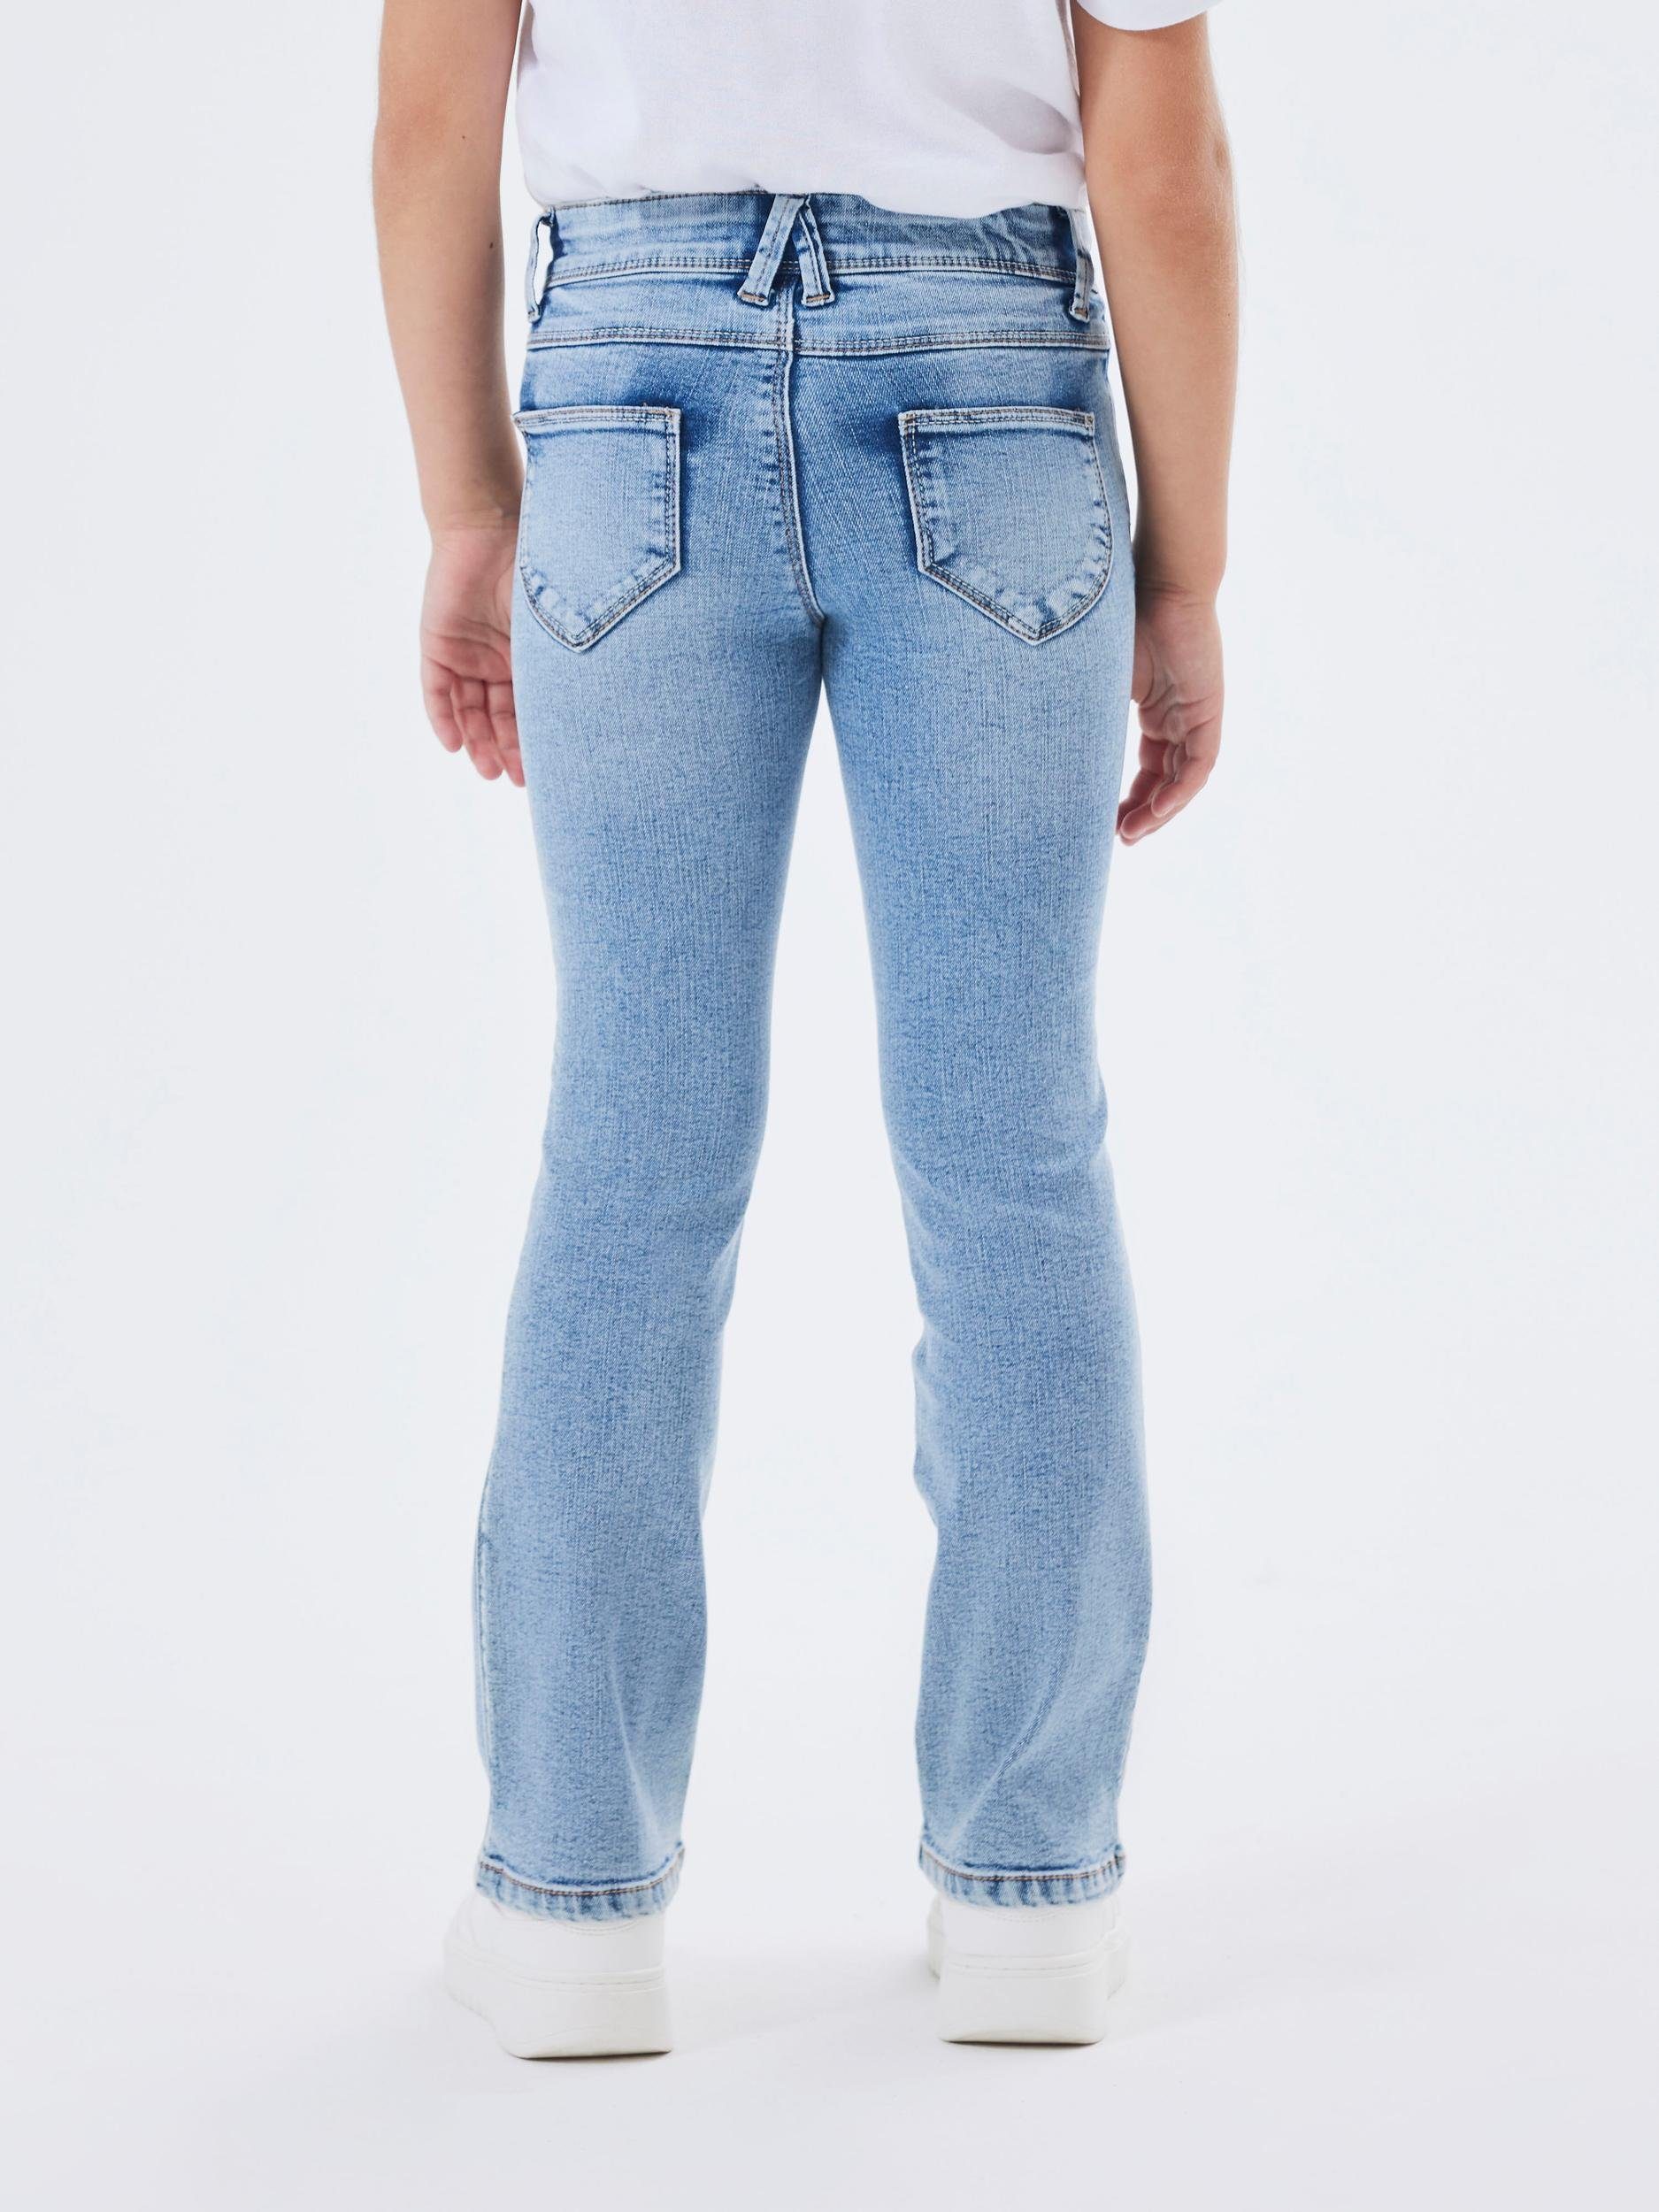 Denim JEANS Light 1142-AU Bootcut-Jeans NOOS SKINNY Stretch Name mit BOOT Blue It NKFPOLLY